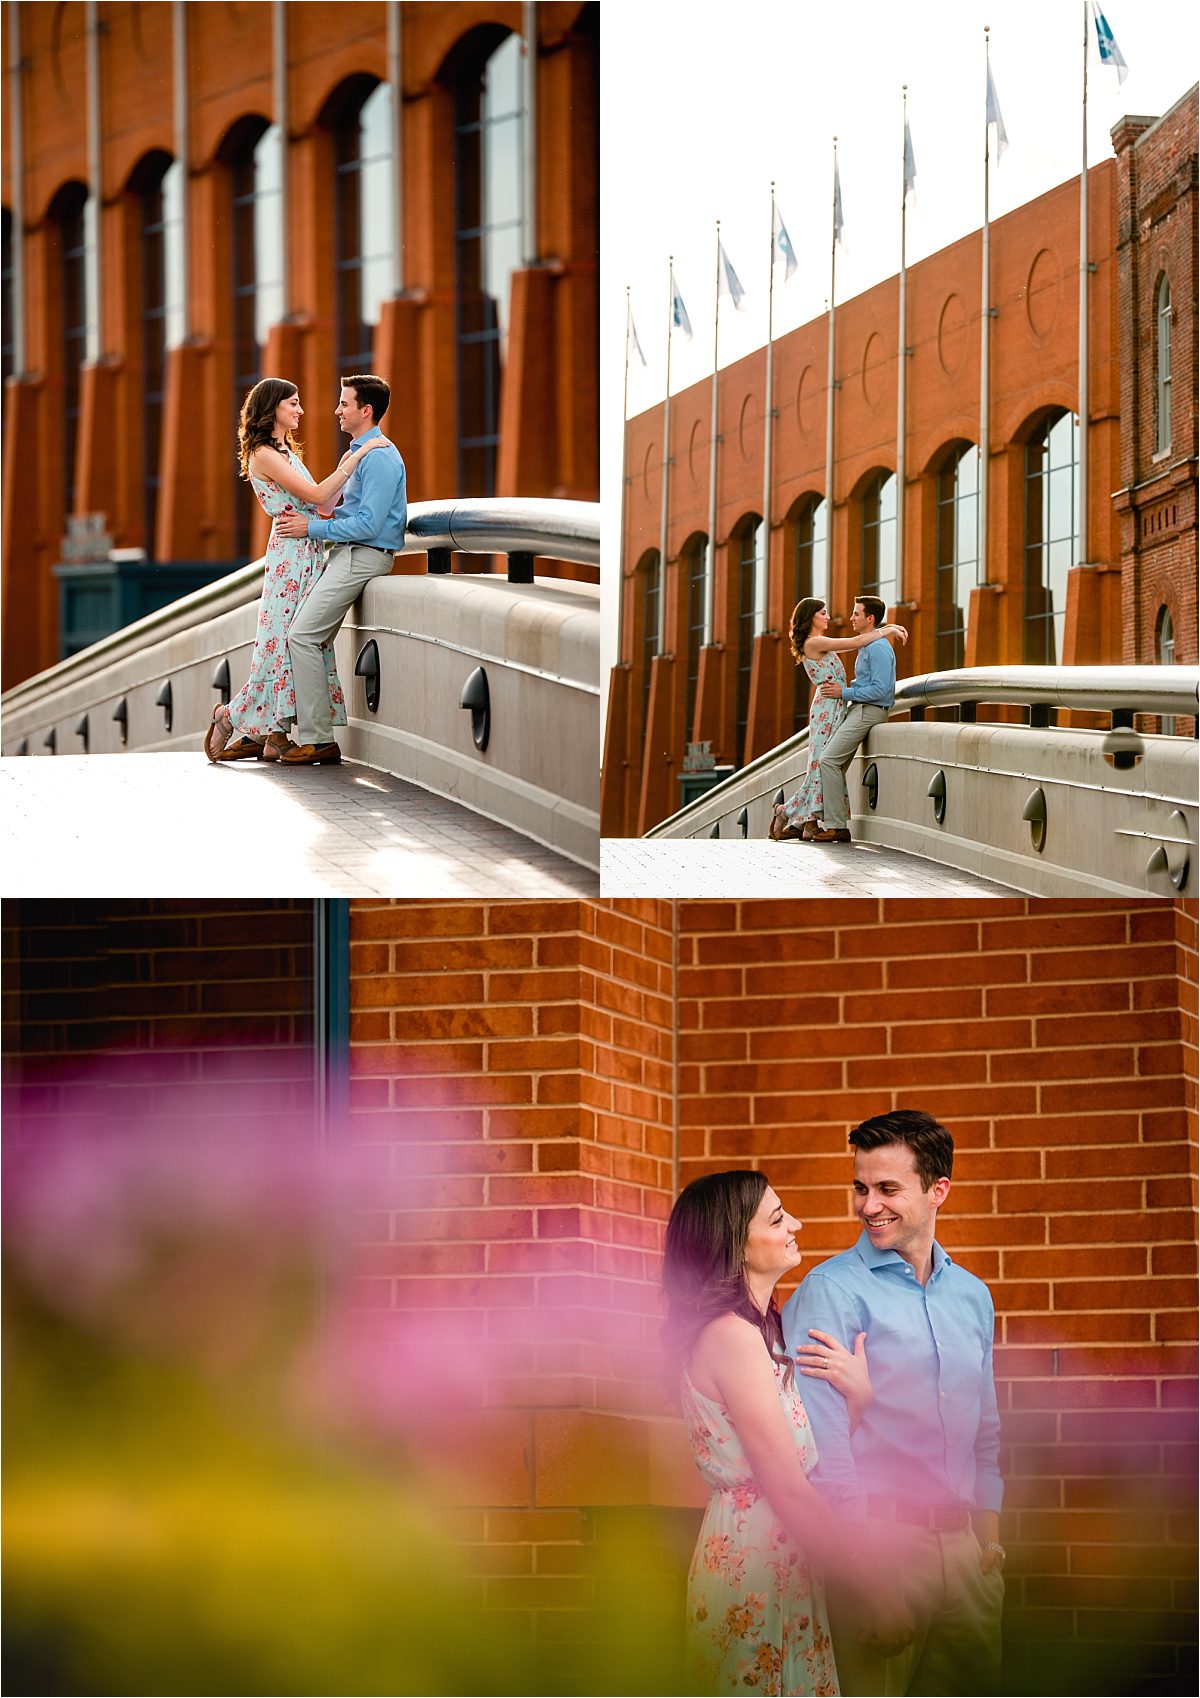 Indianapolis indiana wedding photographer | Indy Canal session at sunset